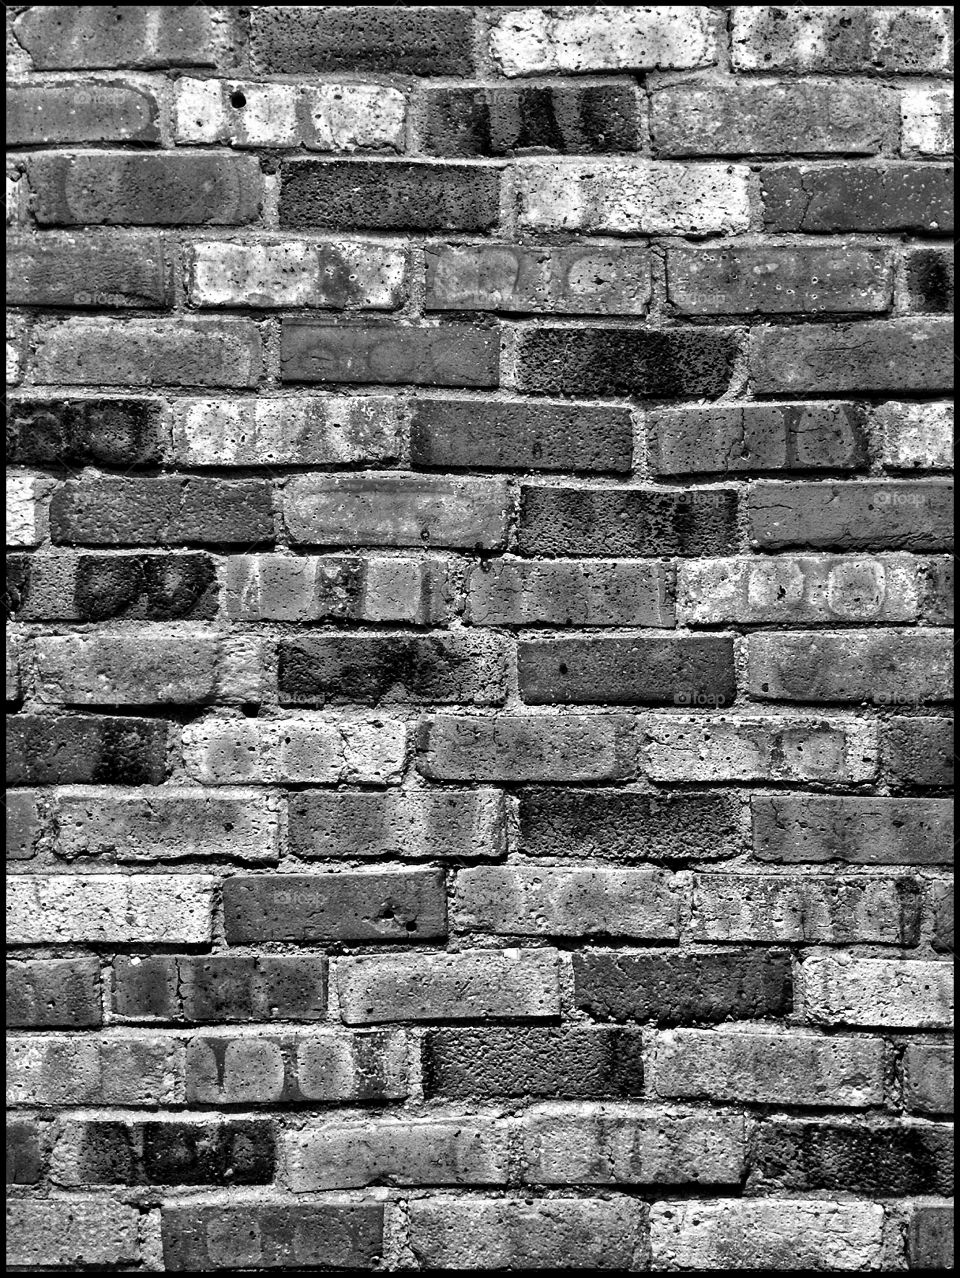 Brick Wall in Black and White